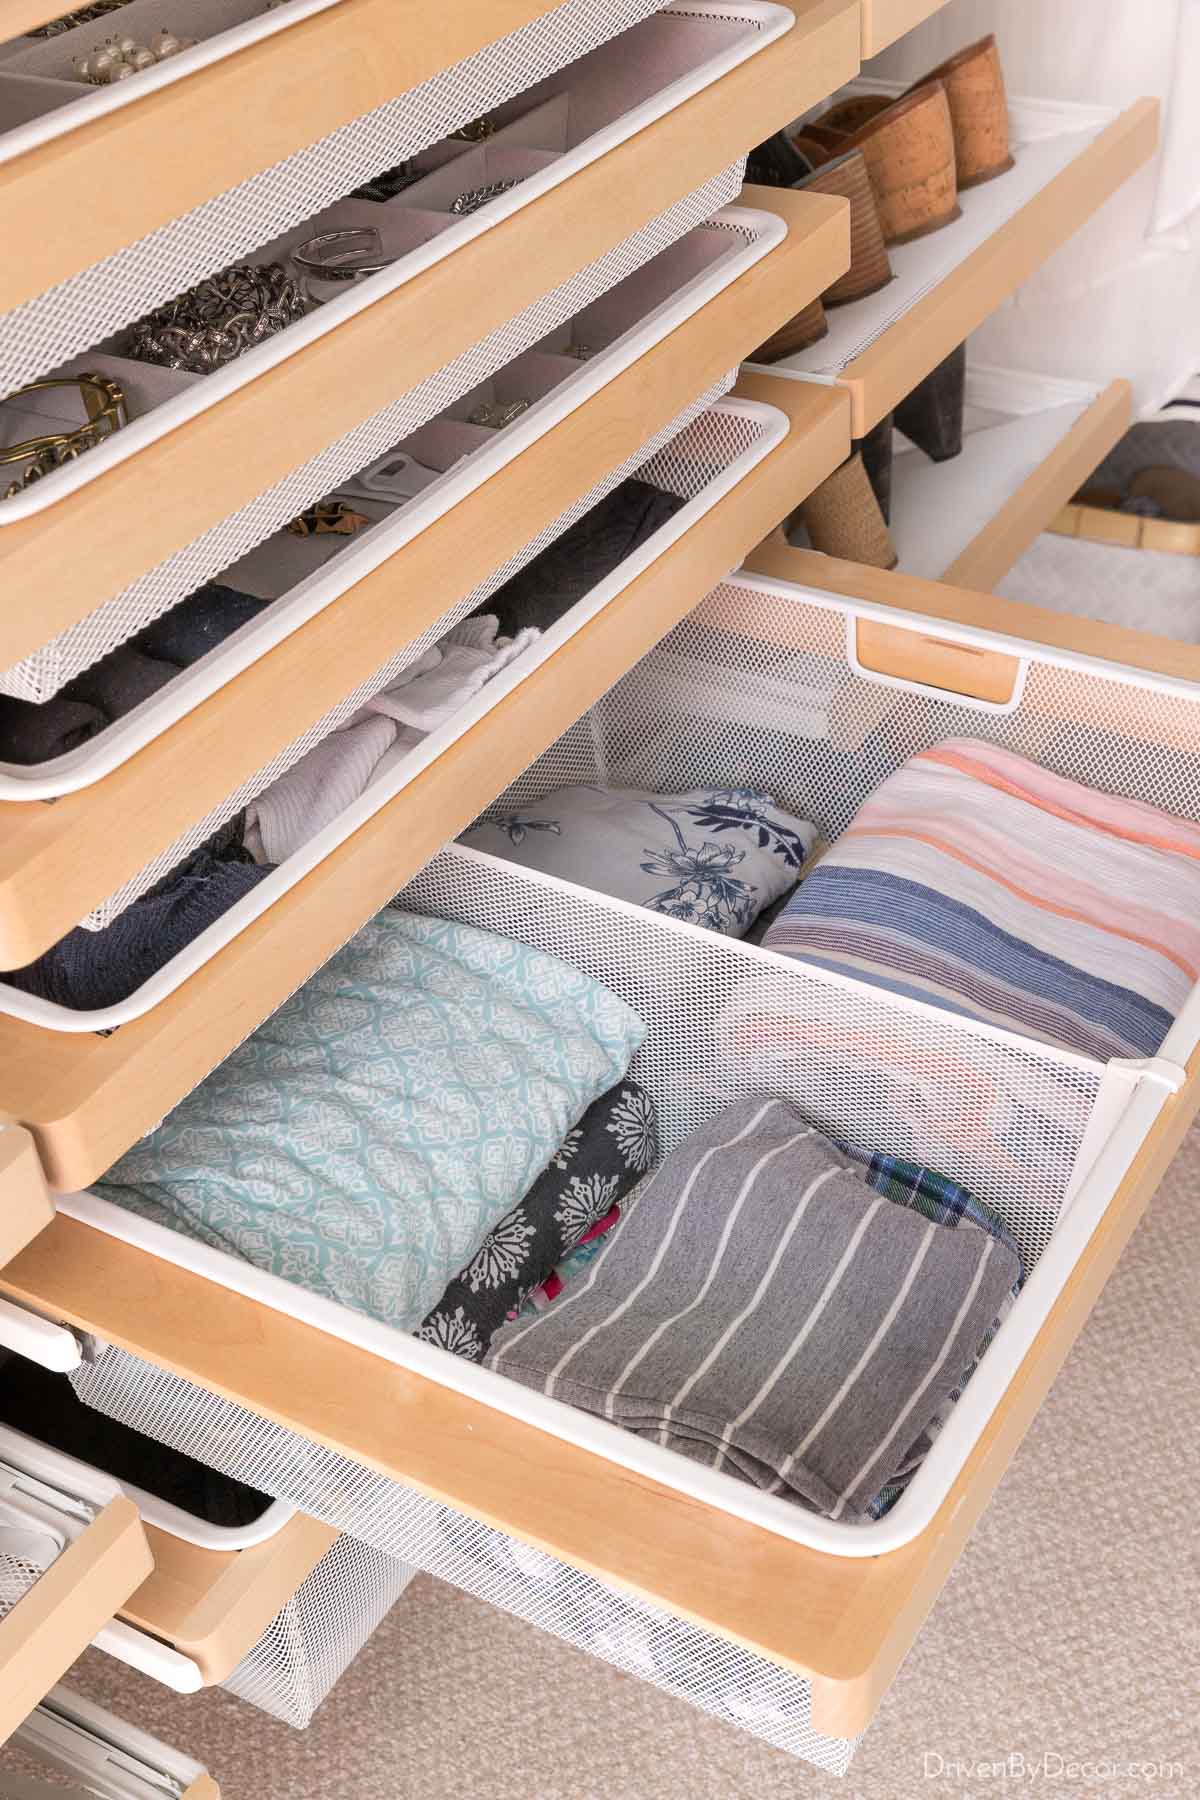 The Elfa closet system's wire mesh drawers